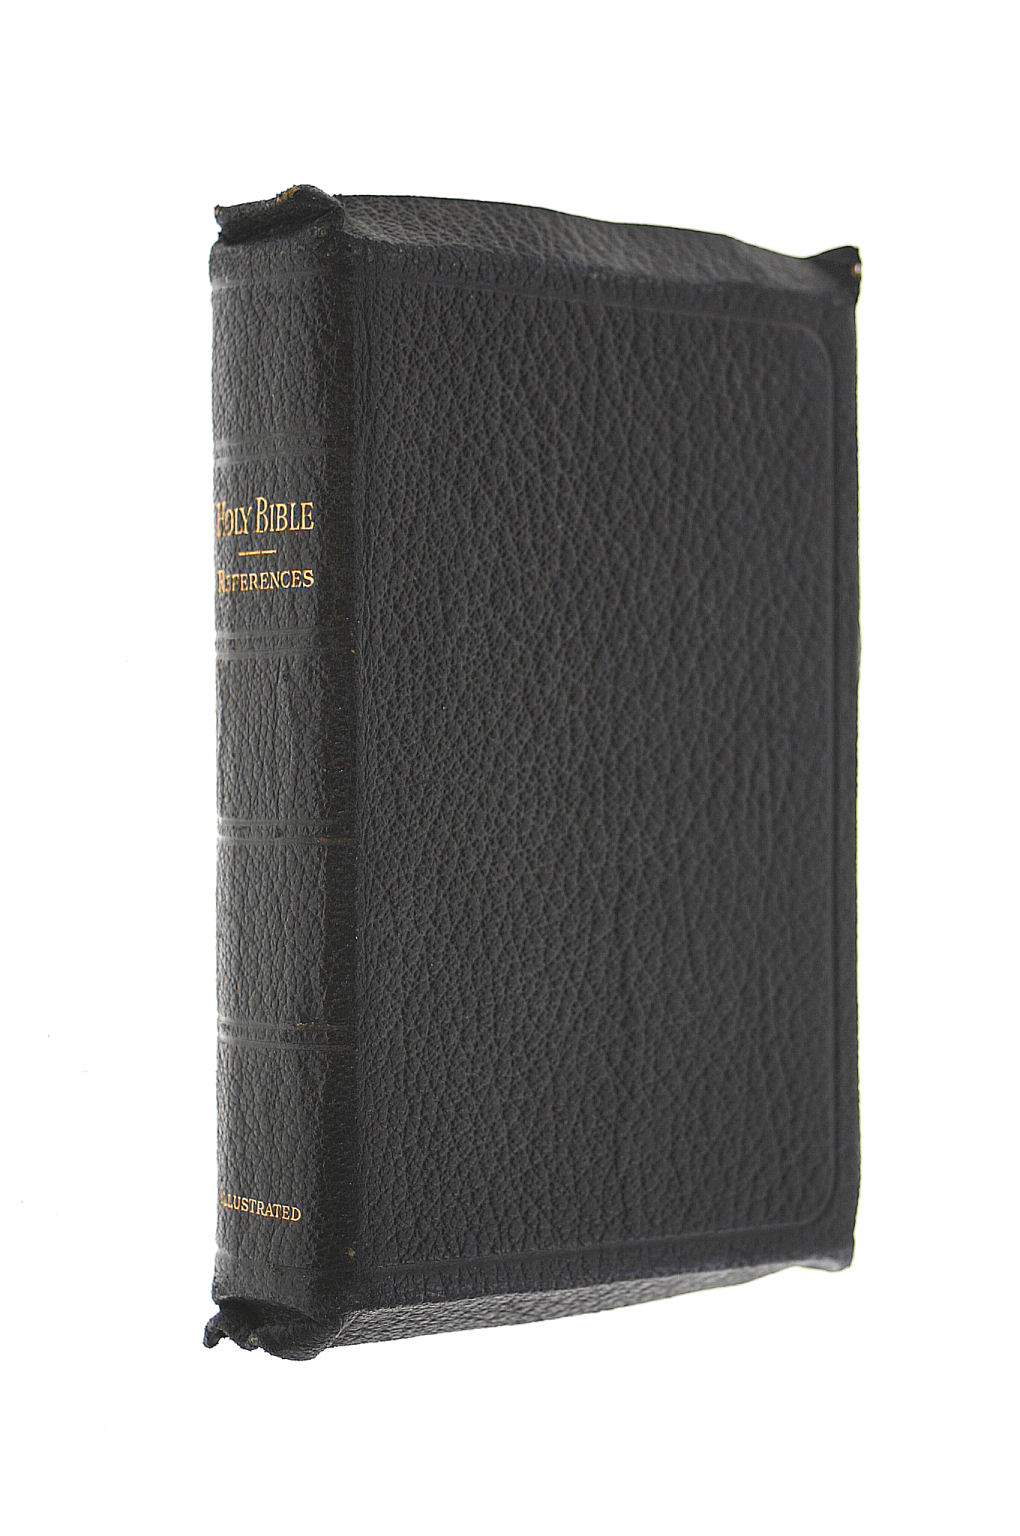 VARIOUS - The Holy Bible Containing The Old And New Testaments, King James Bible